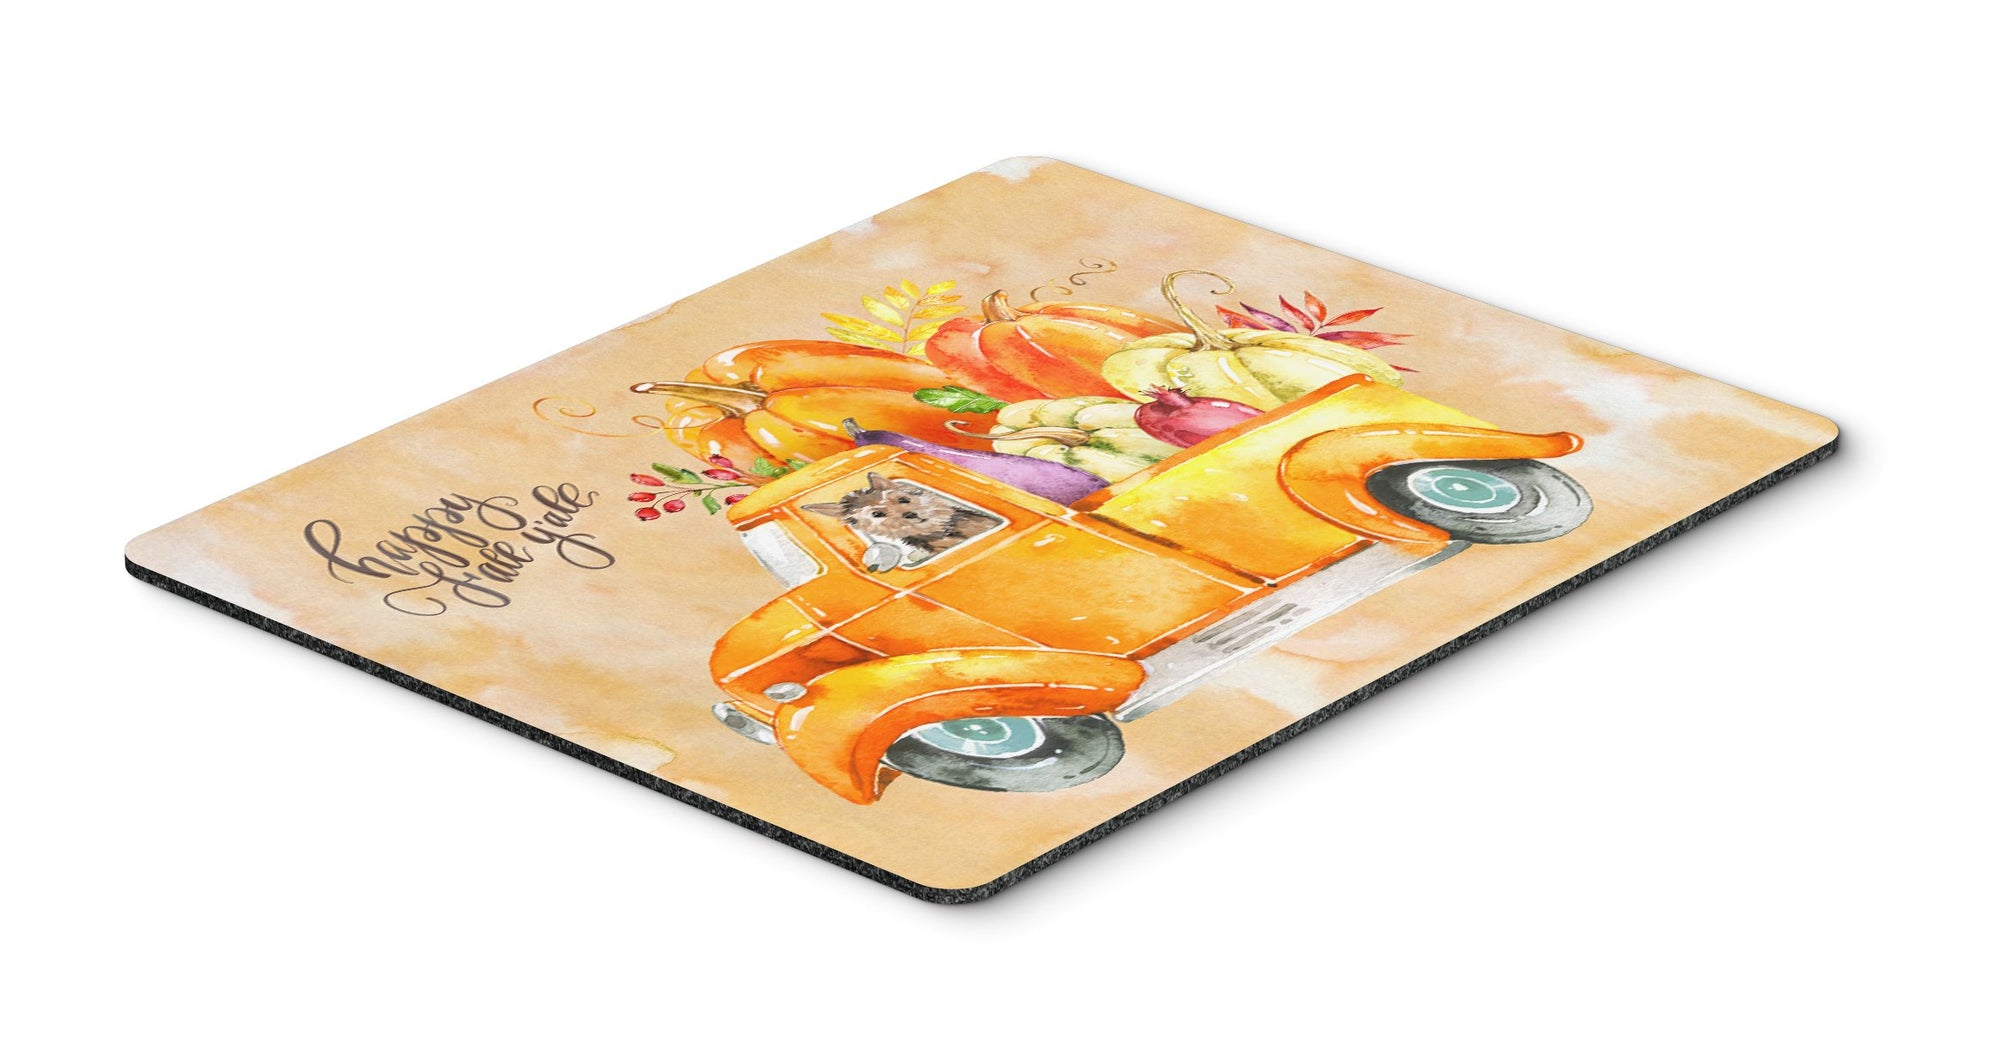 Fall Harvest Norwich Terrier Mouse Pad, Hot Pad or Trivet CK2673MP by Caroline's Treasures